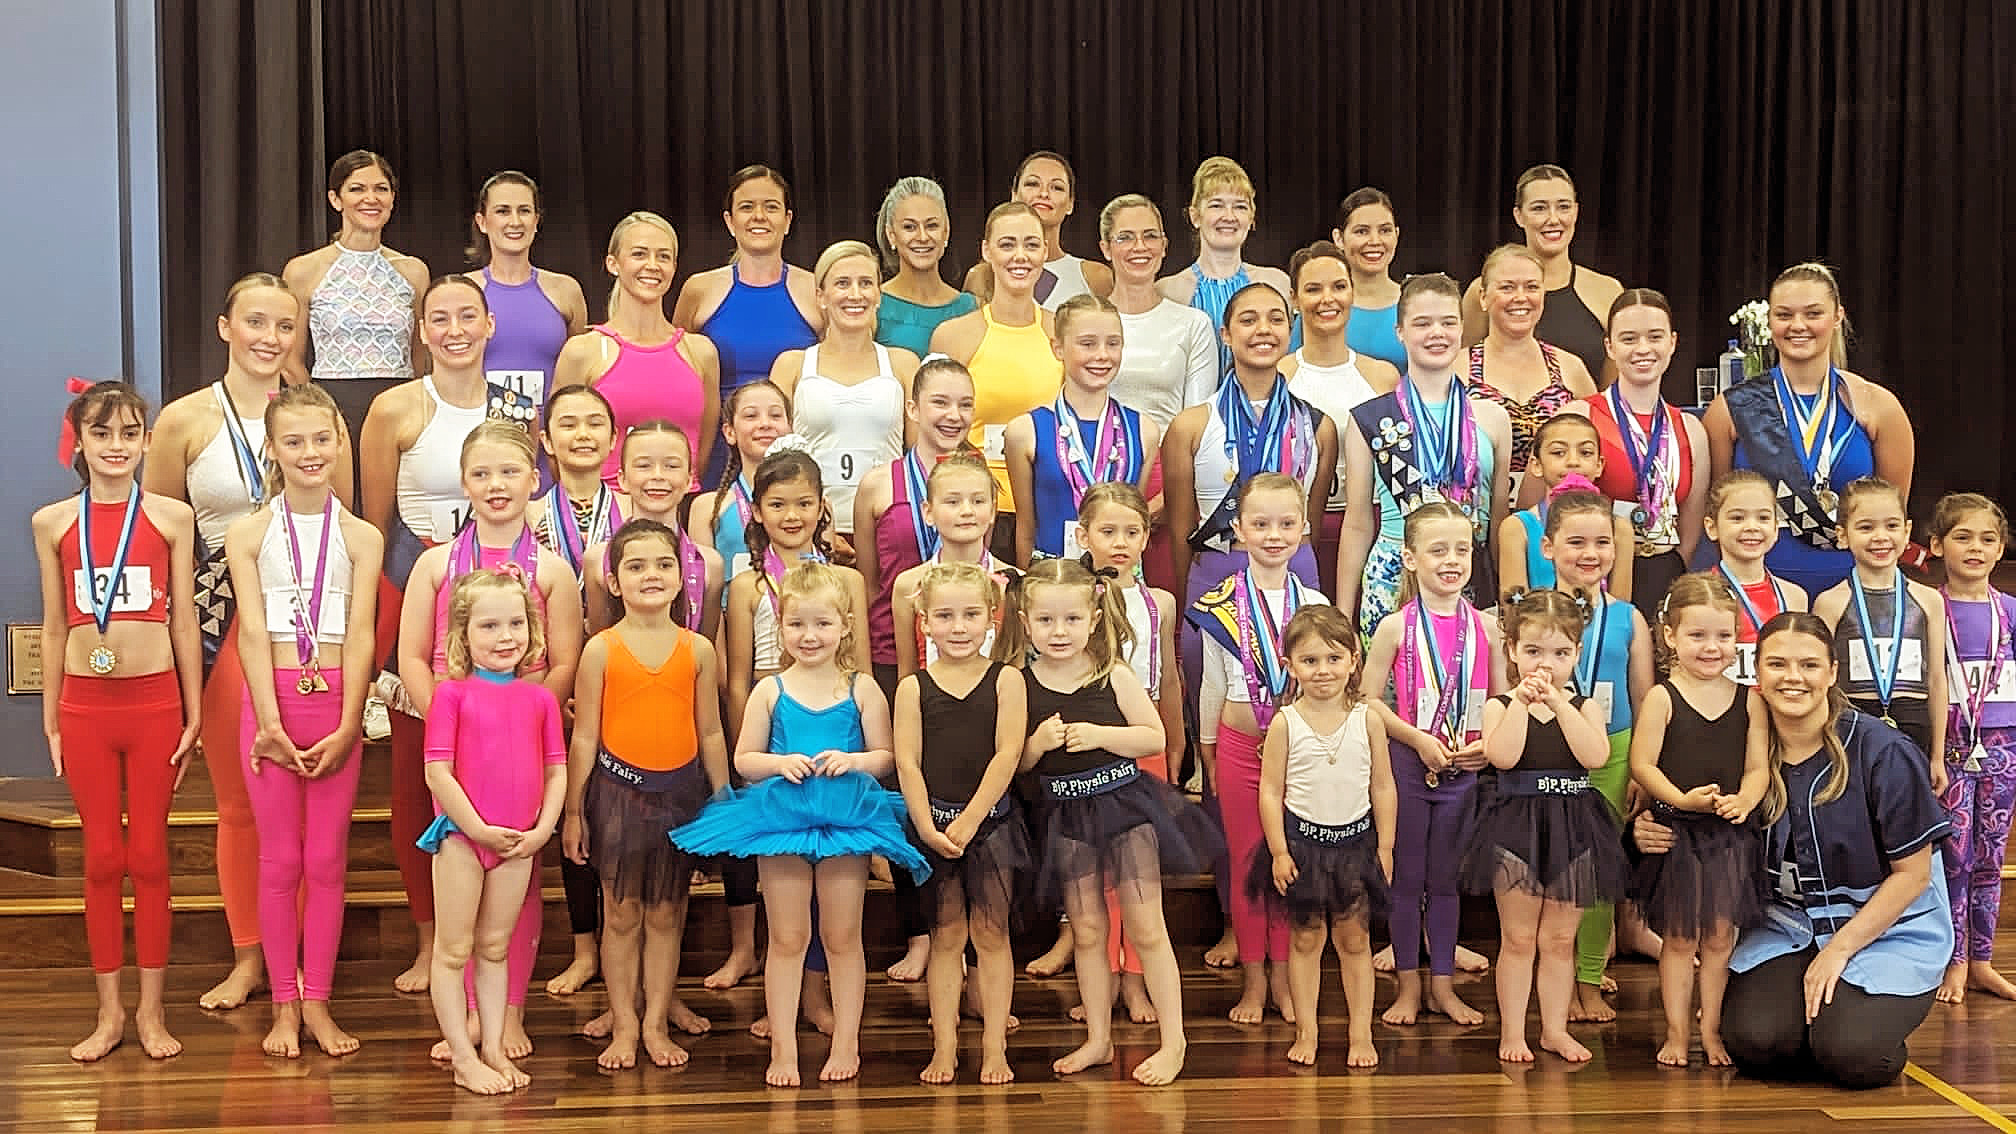 Did you know that Terrigal Physie offers fun, family-focused dance classes to toddlers, kids and mums? And your first week is FREE!